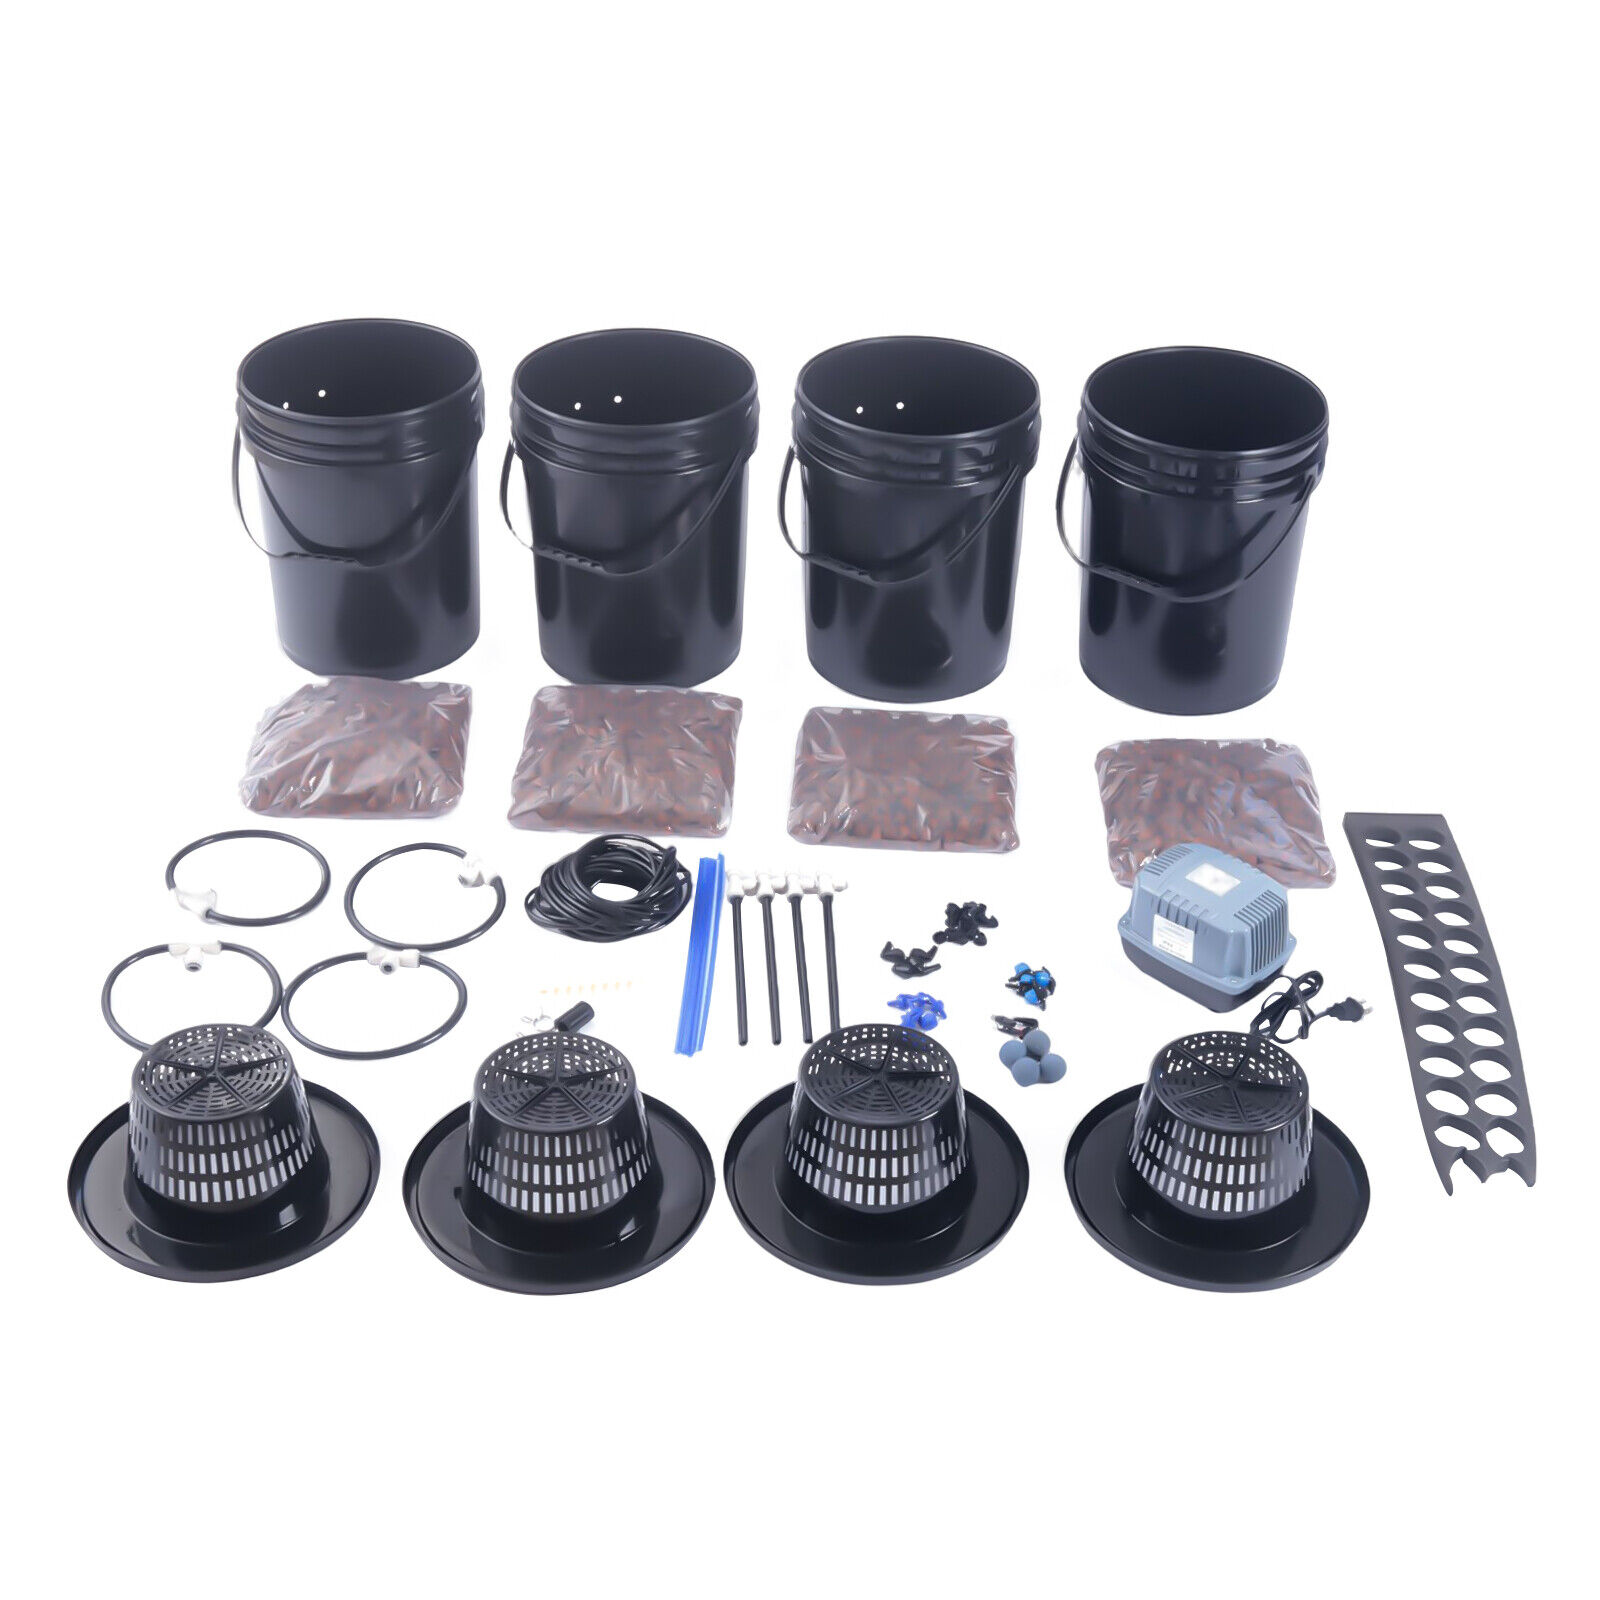 Hydroponics Growing System Drip Garden System With 20L Hydroponic Buckets